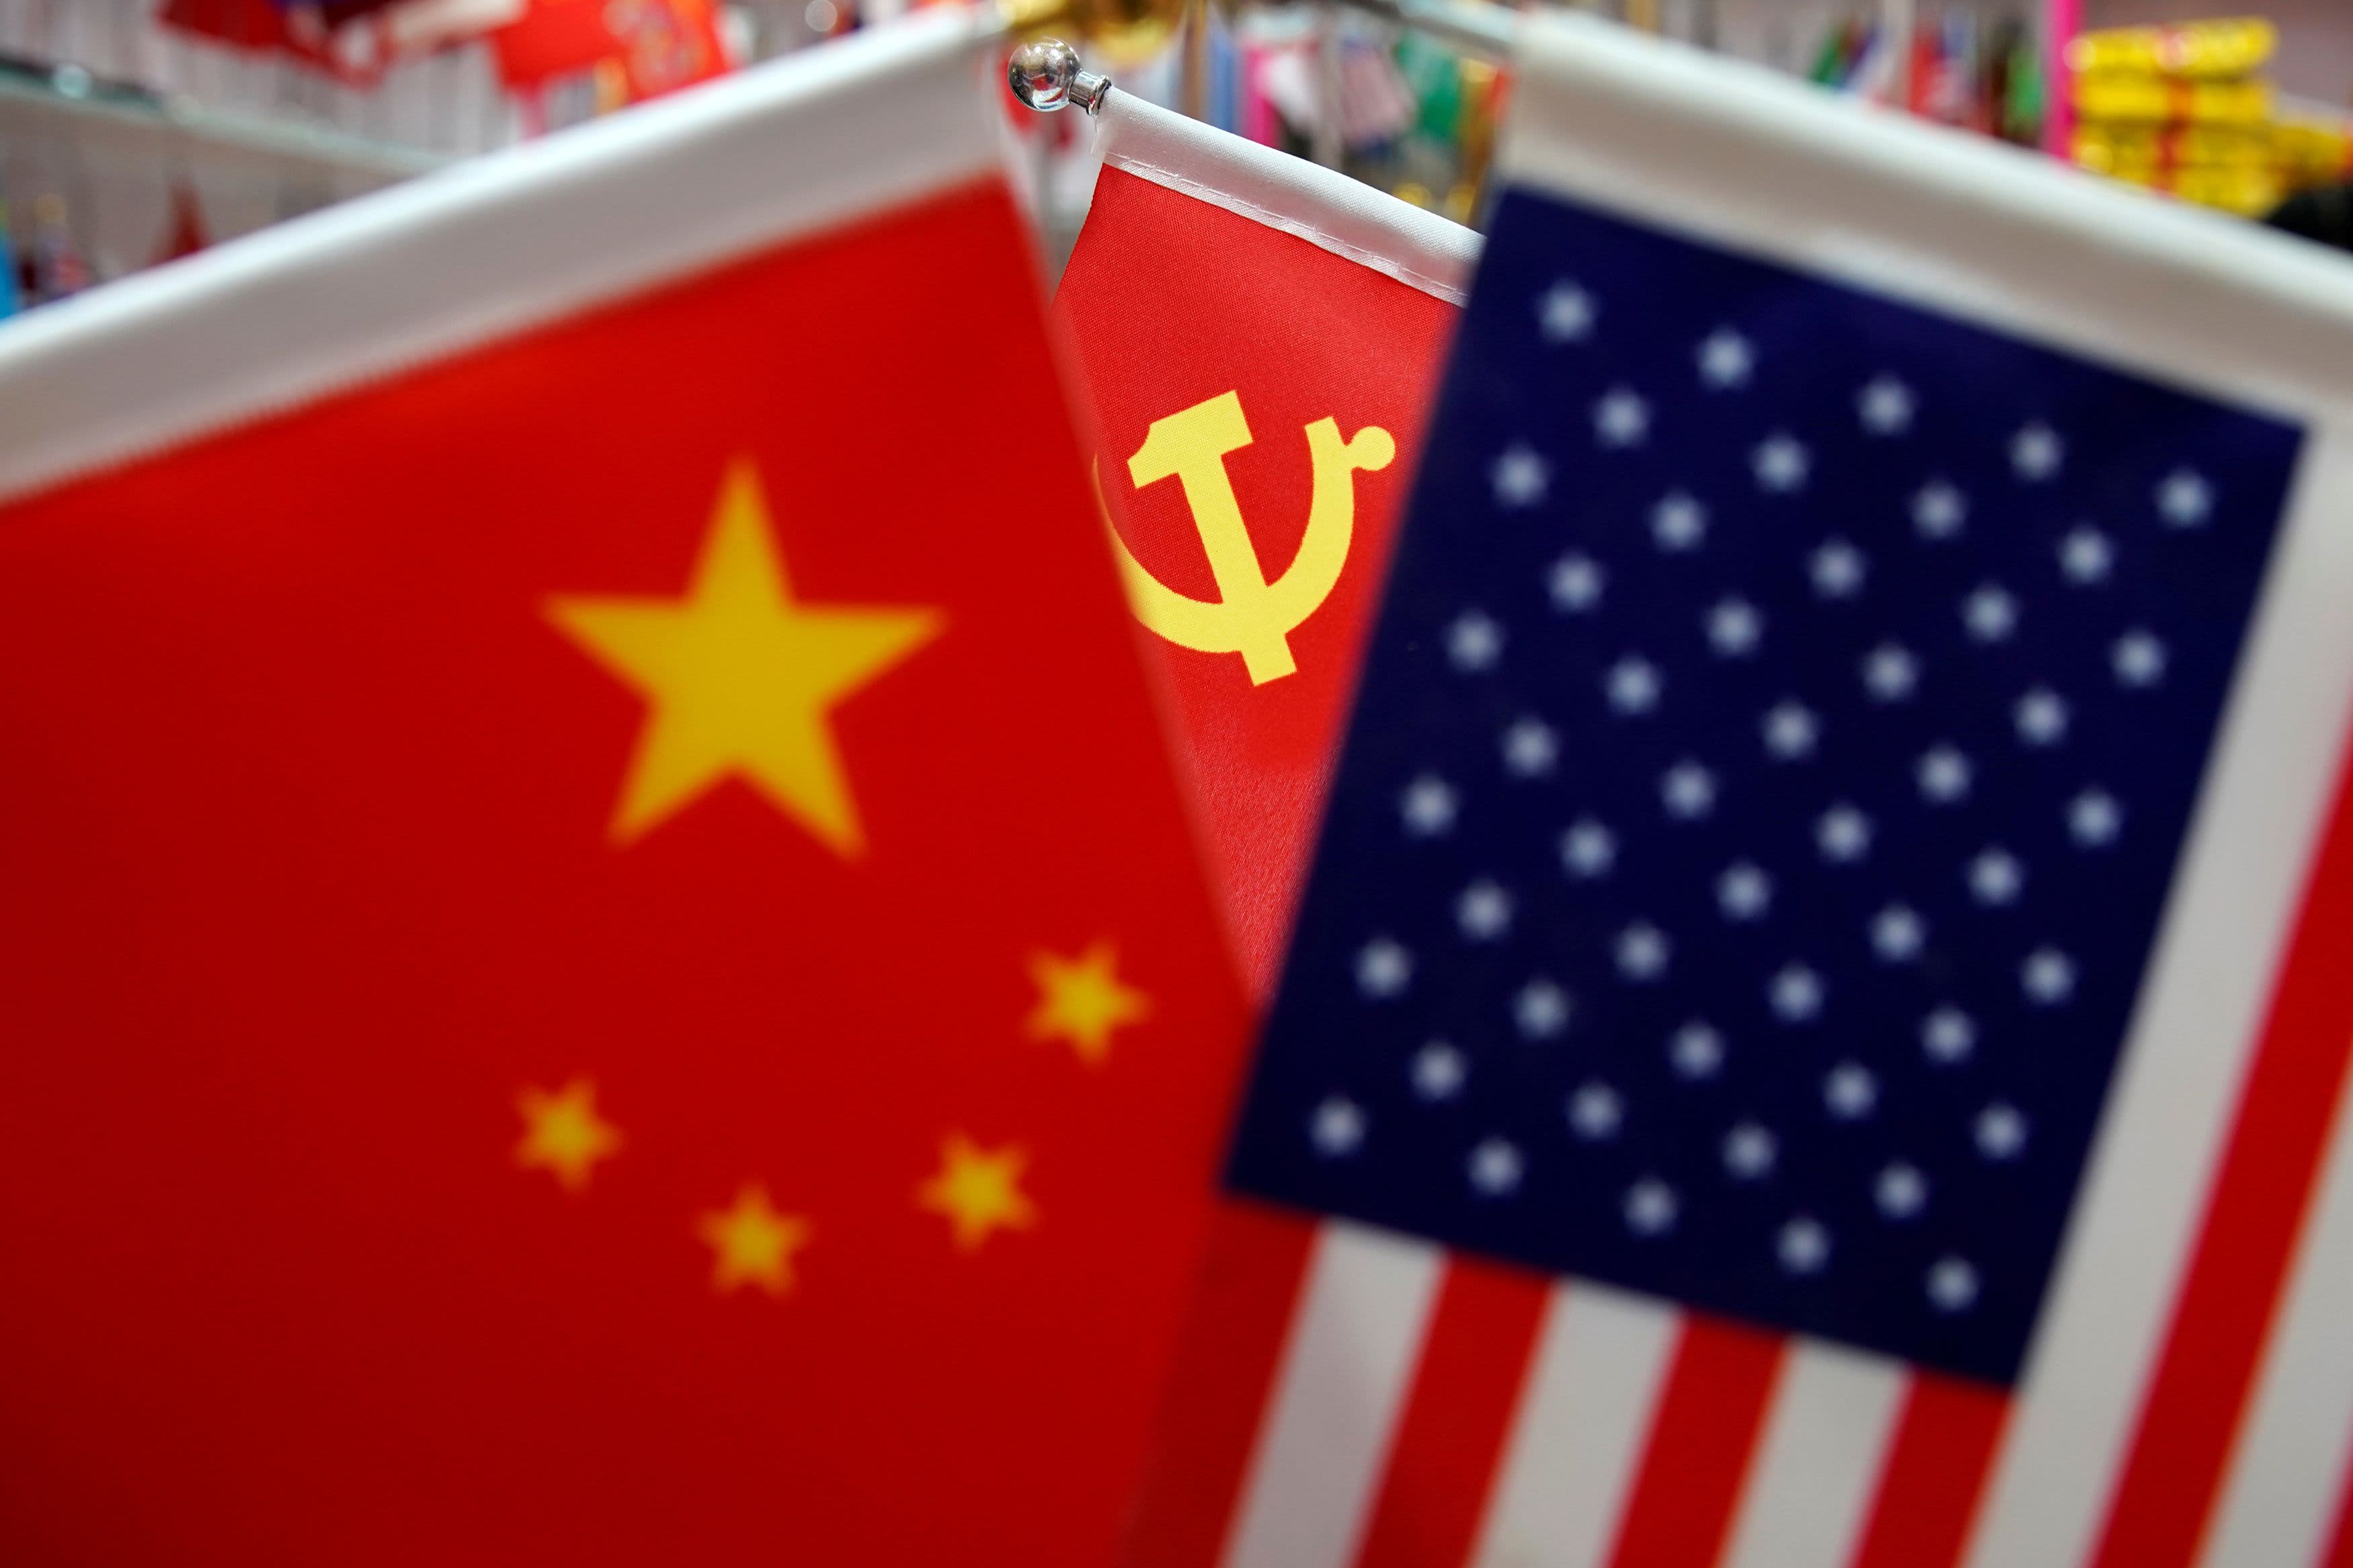 China’s Foreign Minister calls for “non-interference” between China and the US.